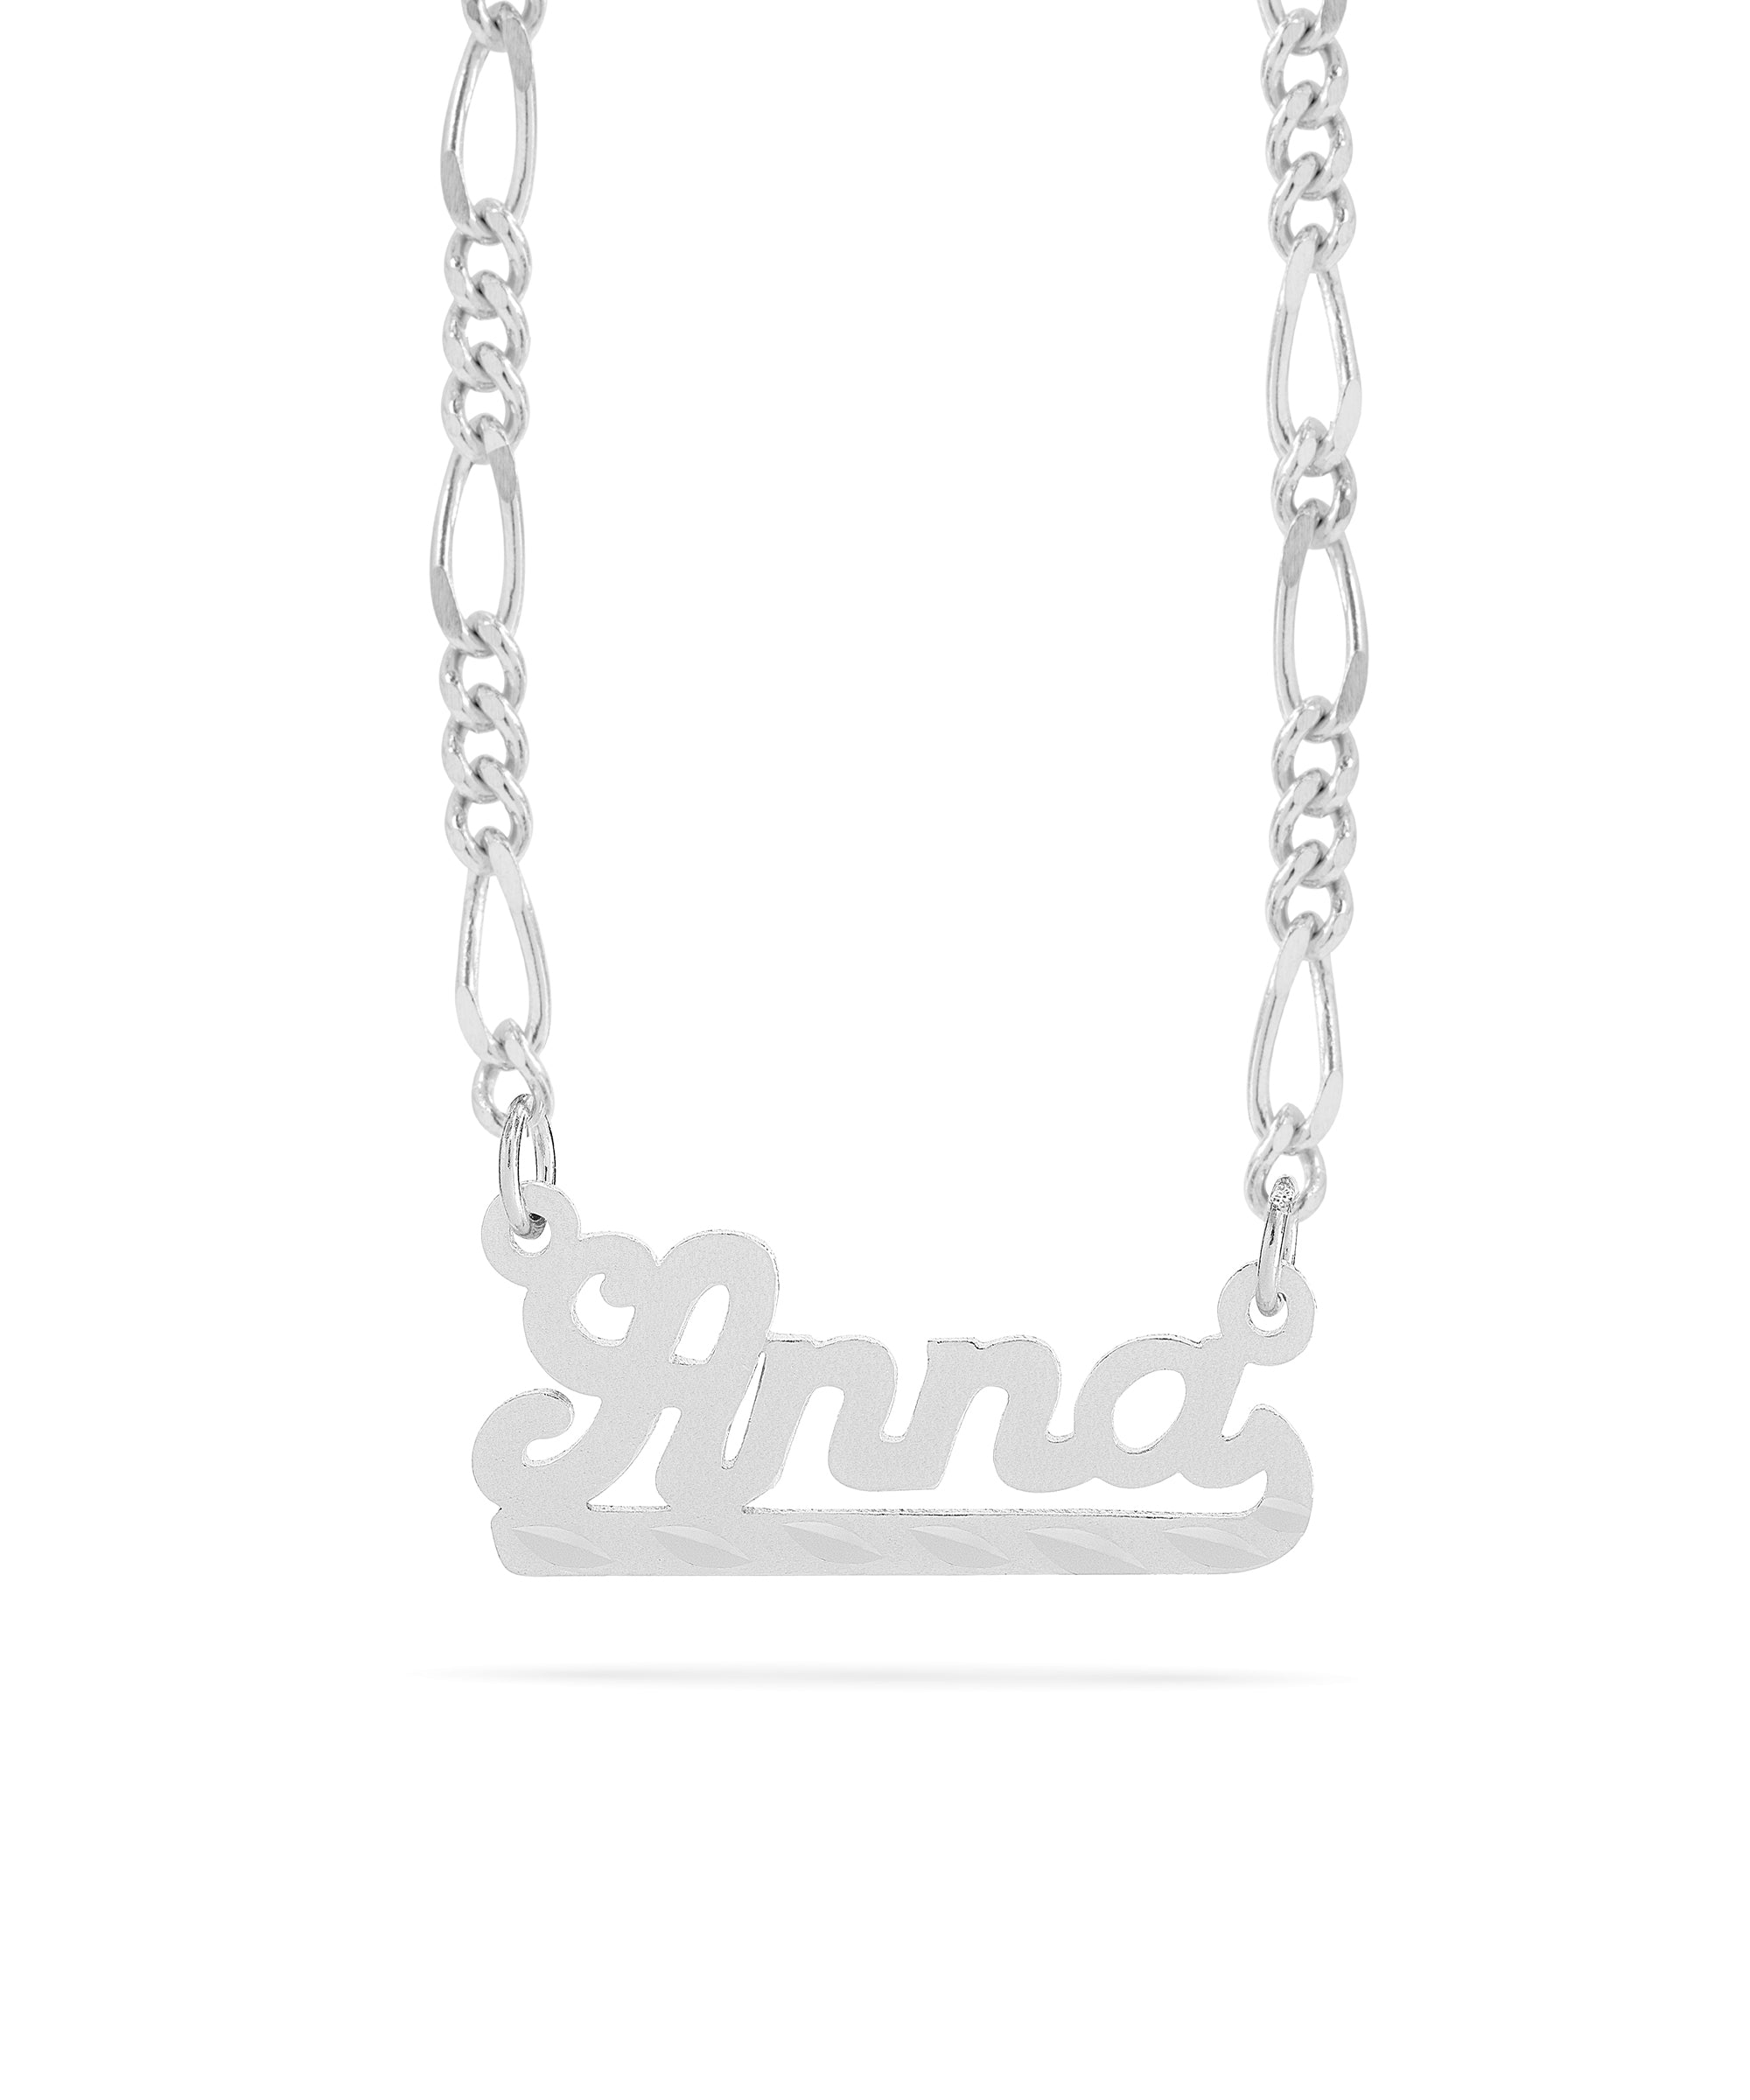 Personalized Name necklace with  Diamond Cut and Satin Finish "Anna"